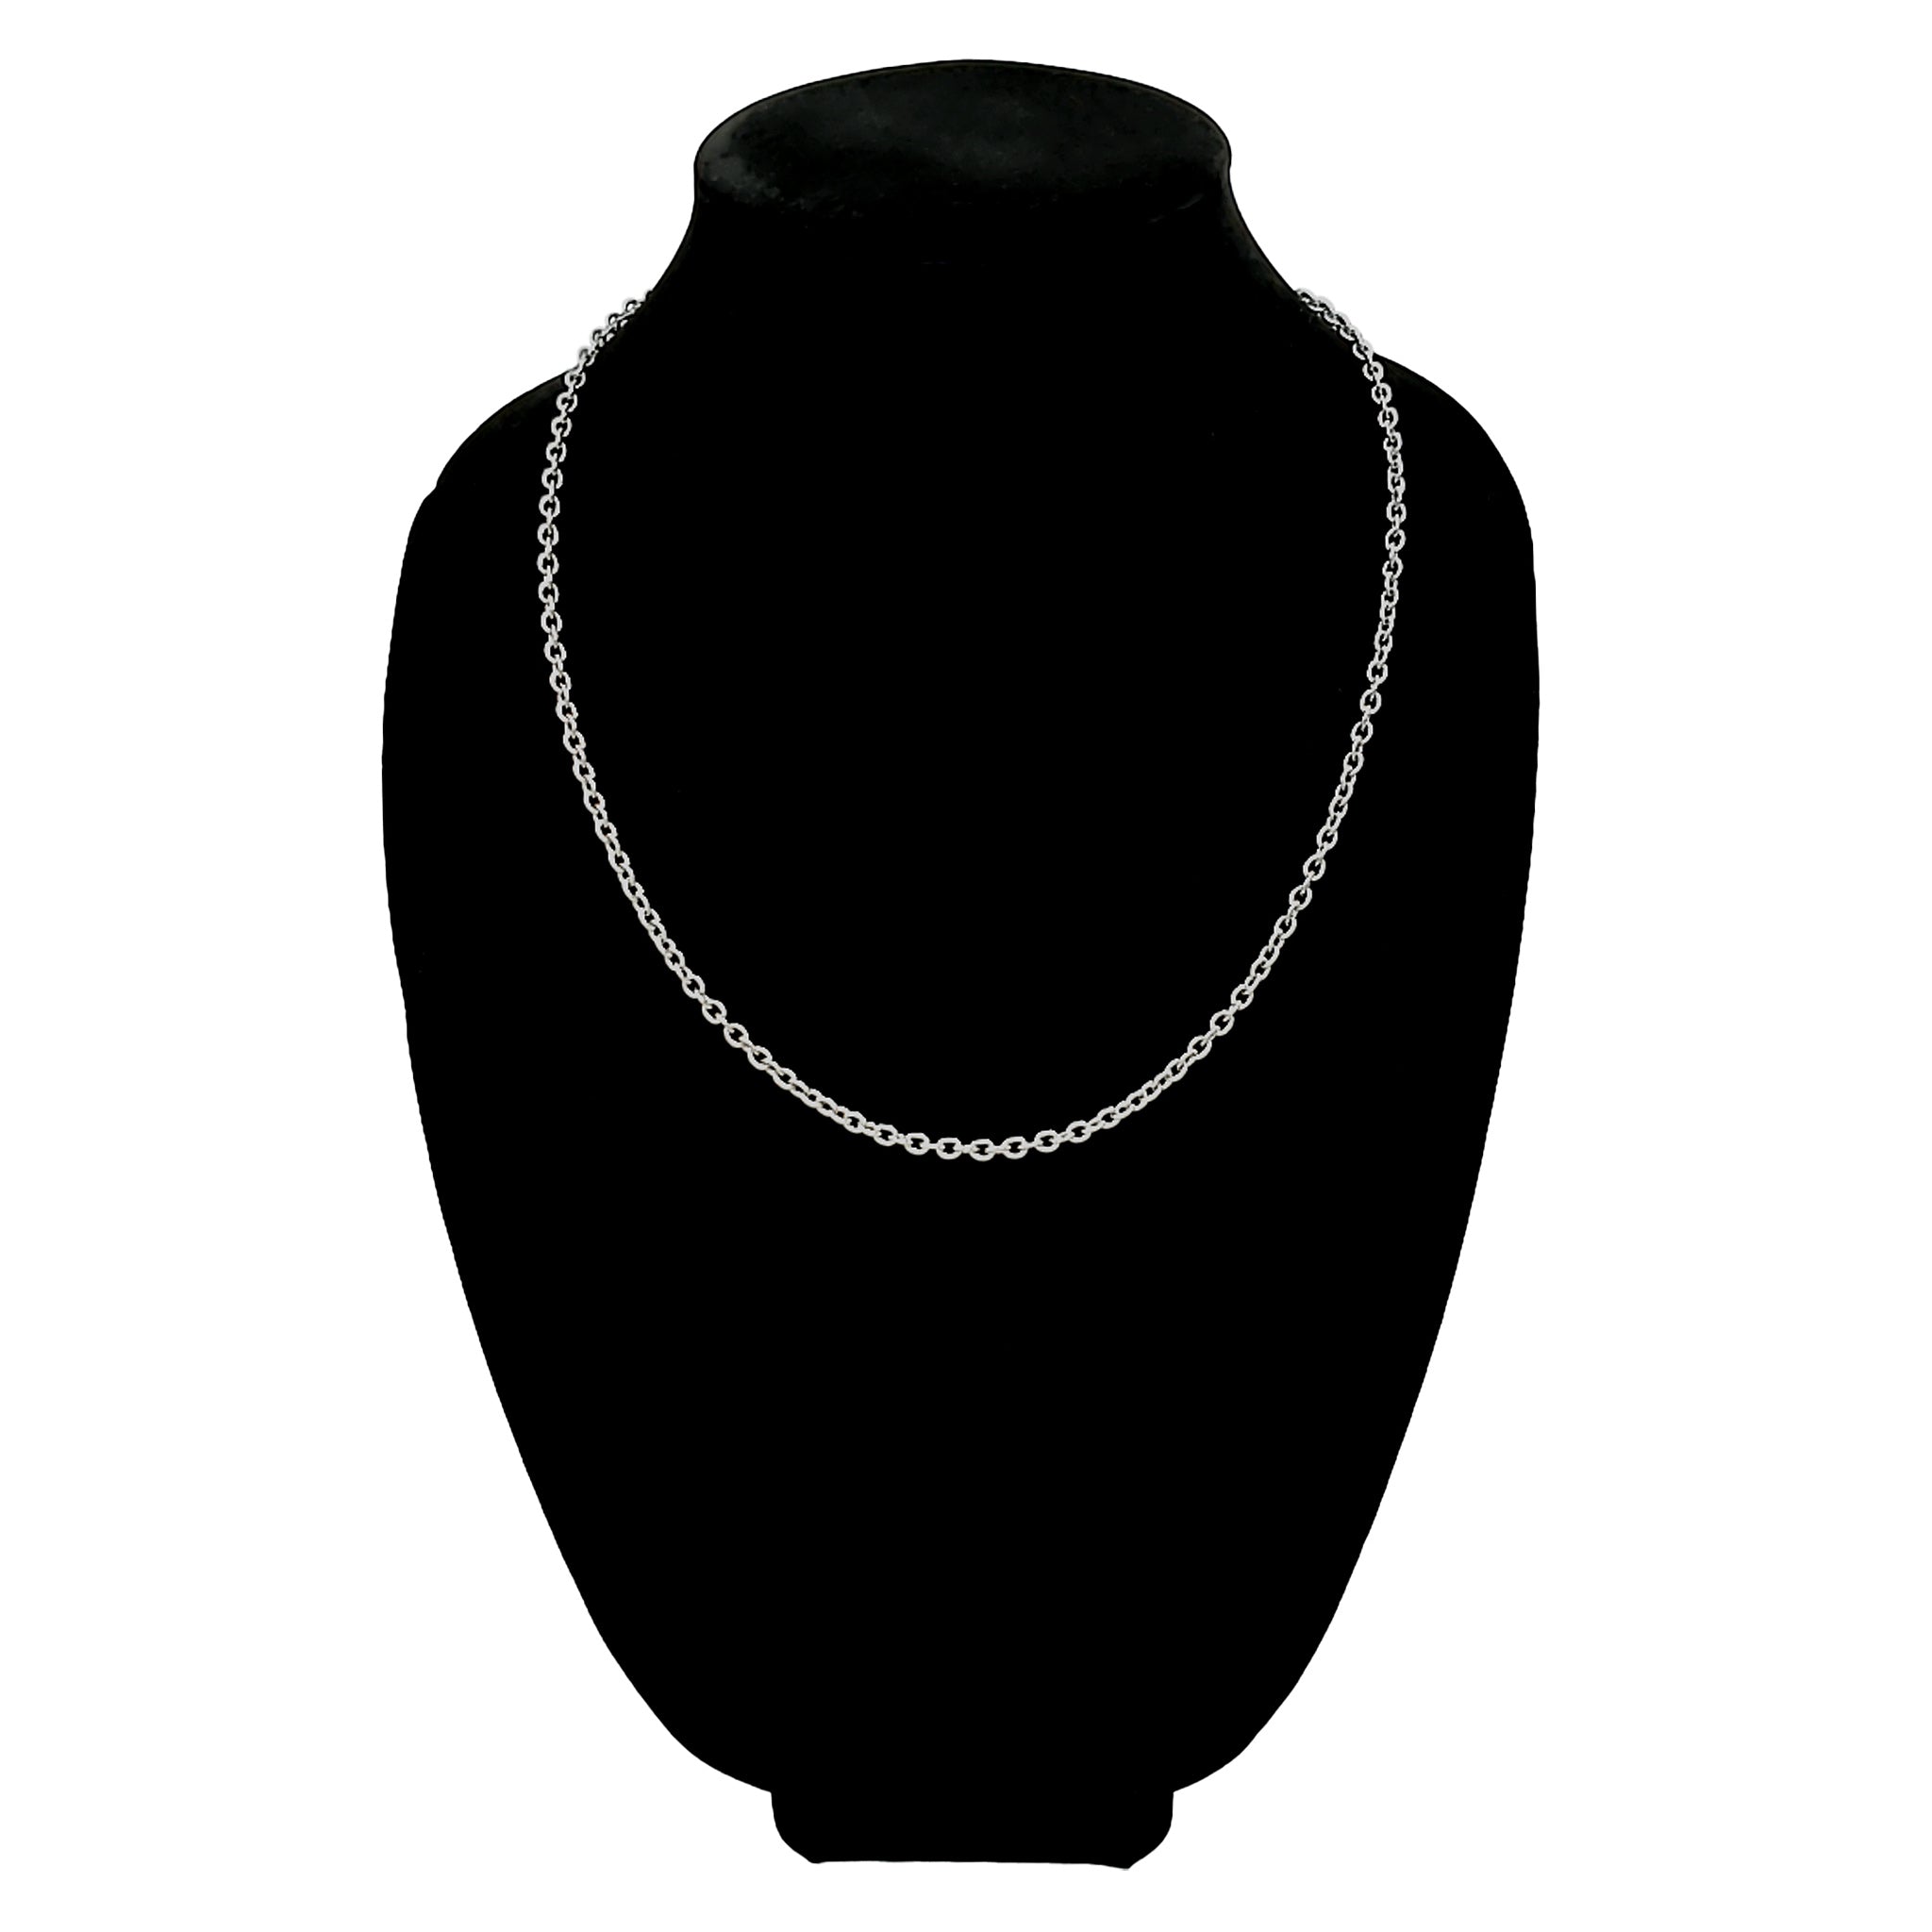 Stainless Steel Link Chain Necklace - Durable, Tarnish-Proof, Hypoallergenic, 22"-26" Lengths Available - Jewelry & Watches - Bijou Her -  -  - 